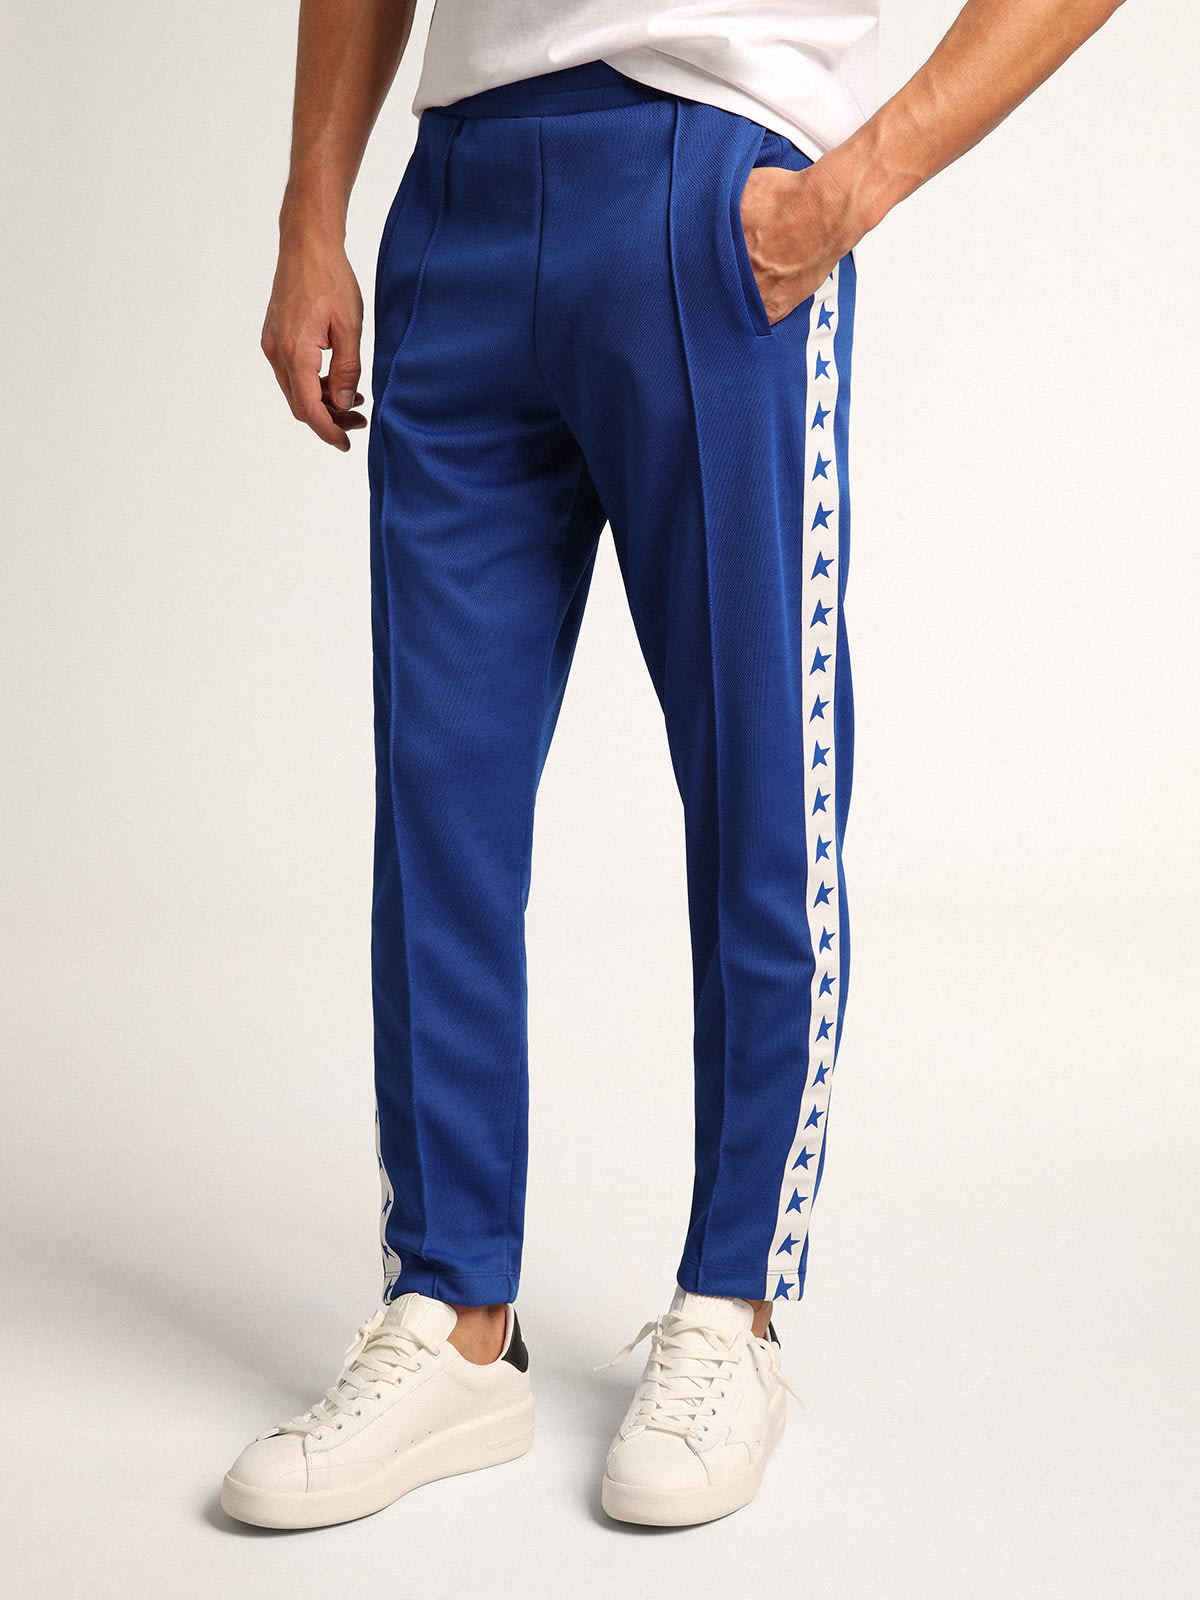 Golden Goose - Light blue Doro Star Collection jogging pants with white strip and light blue stars on the sides in 